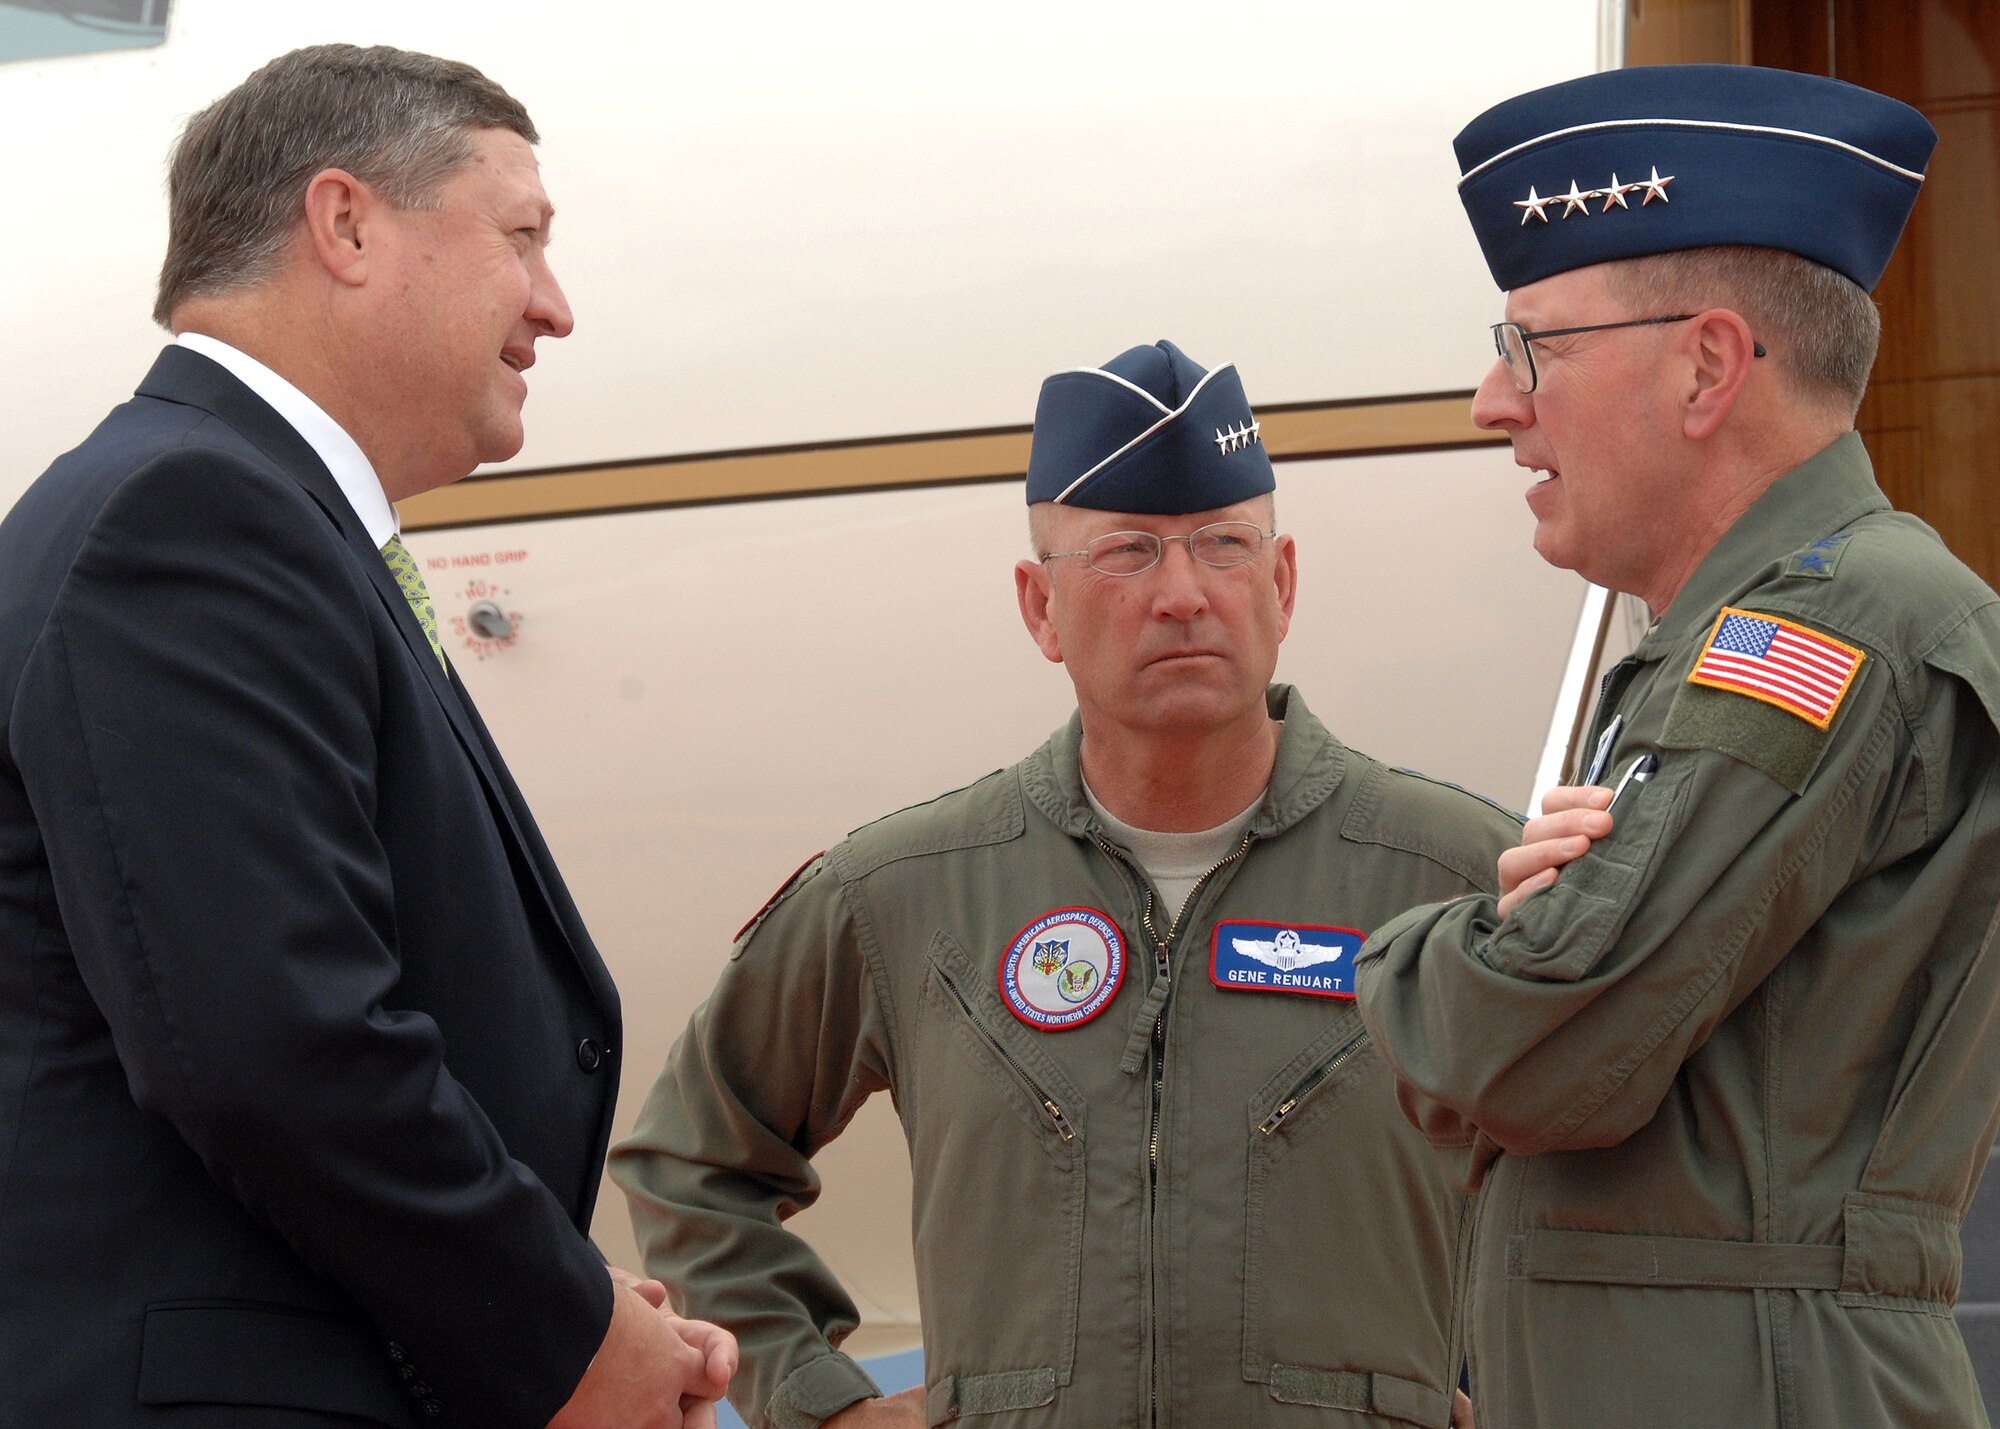 PETERSON AIR FORCE BASE, Colo., -- Acting Secretary of the Air Force Michael B. Donley (left) is greeted by Gen. C. Robert Kehler, commander of Air Force Space Command (right) and Gen. Gene Renuart, commander of U.S. Northern Command and the North American Aerospace Defense Command upon his arrival at Peterson Air Force Base, Colo. Mr. Donley visited four bases on July 1-2 to discuss his perspectives and address the issues facing the Air Force. (U. S. Air Force photo by Duncan Wood)